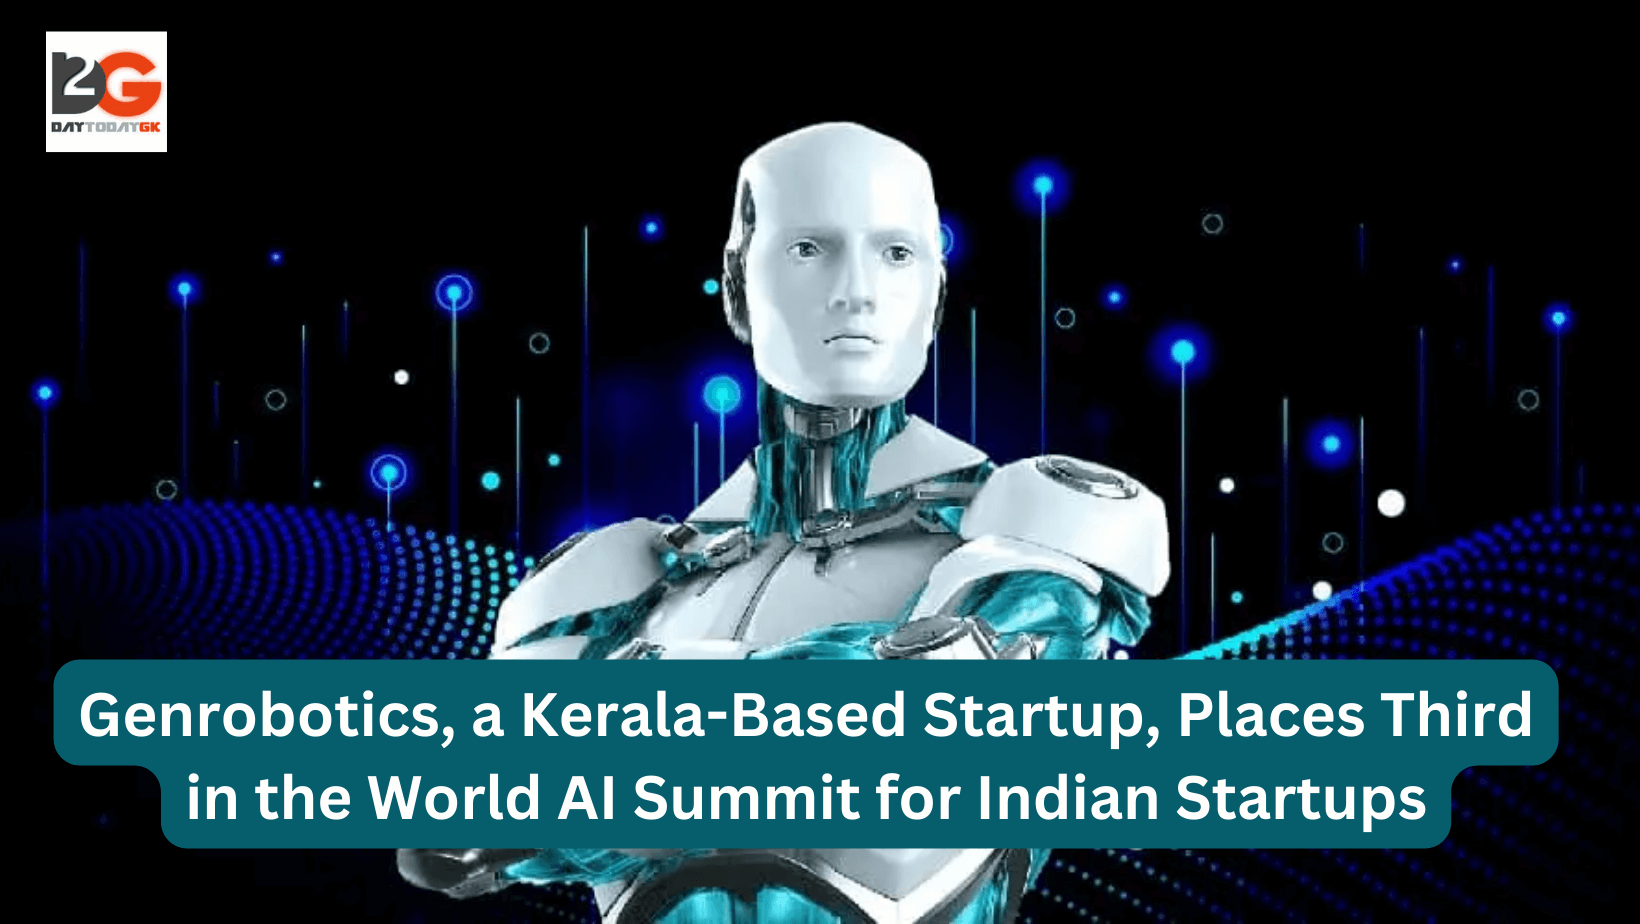 Genrobotics, a Kerala-Based Startup, Places Third in the World AI Summit for Indian Startups